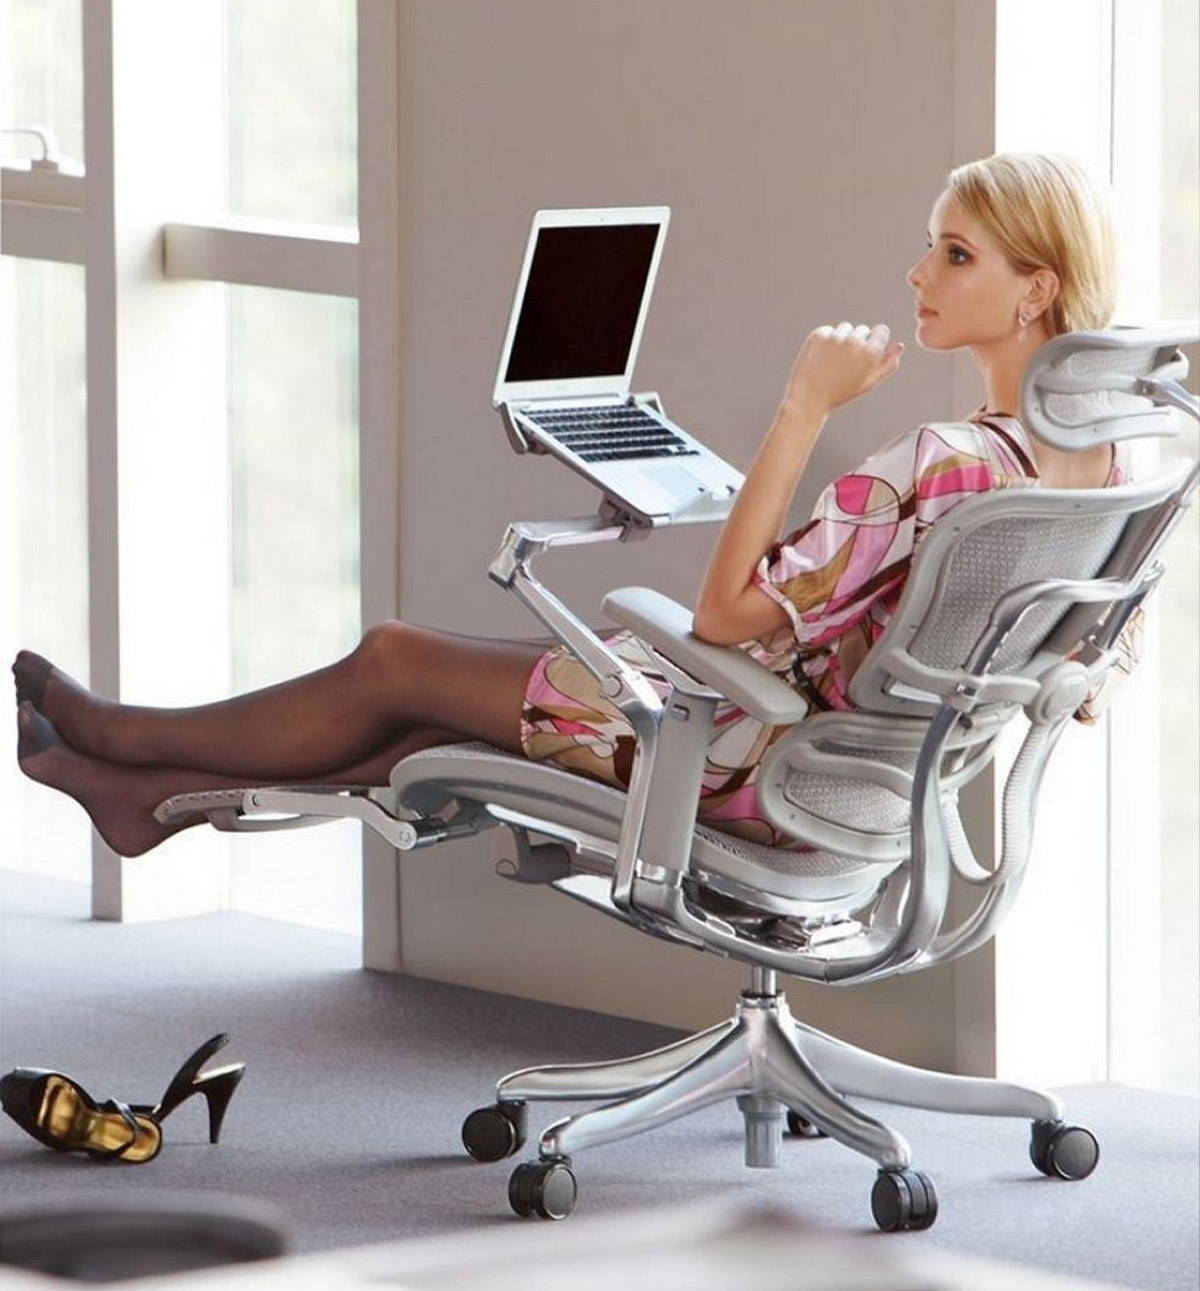 Orthopedic Office Chairs Ideas On Foter